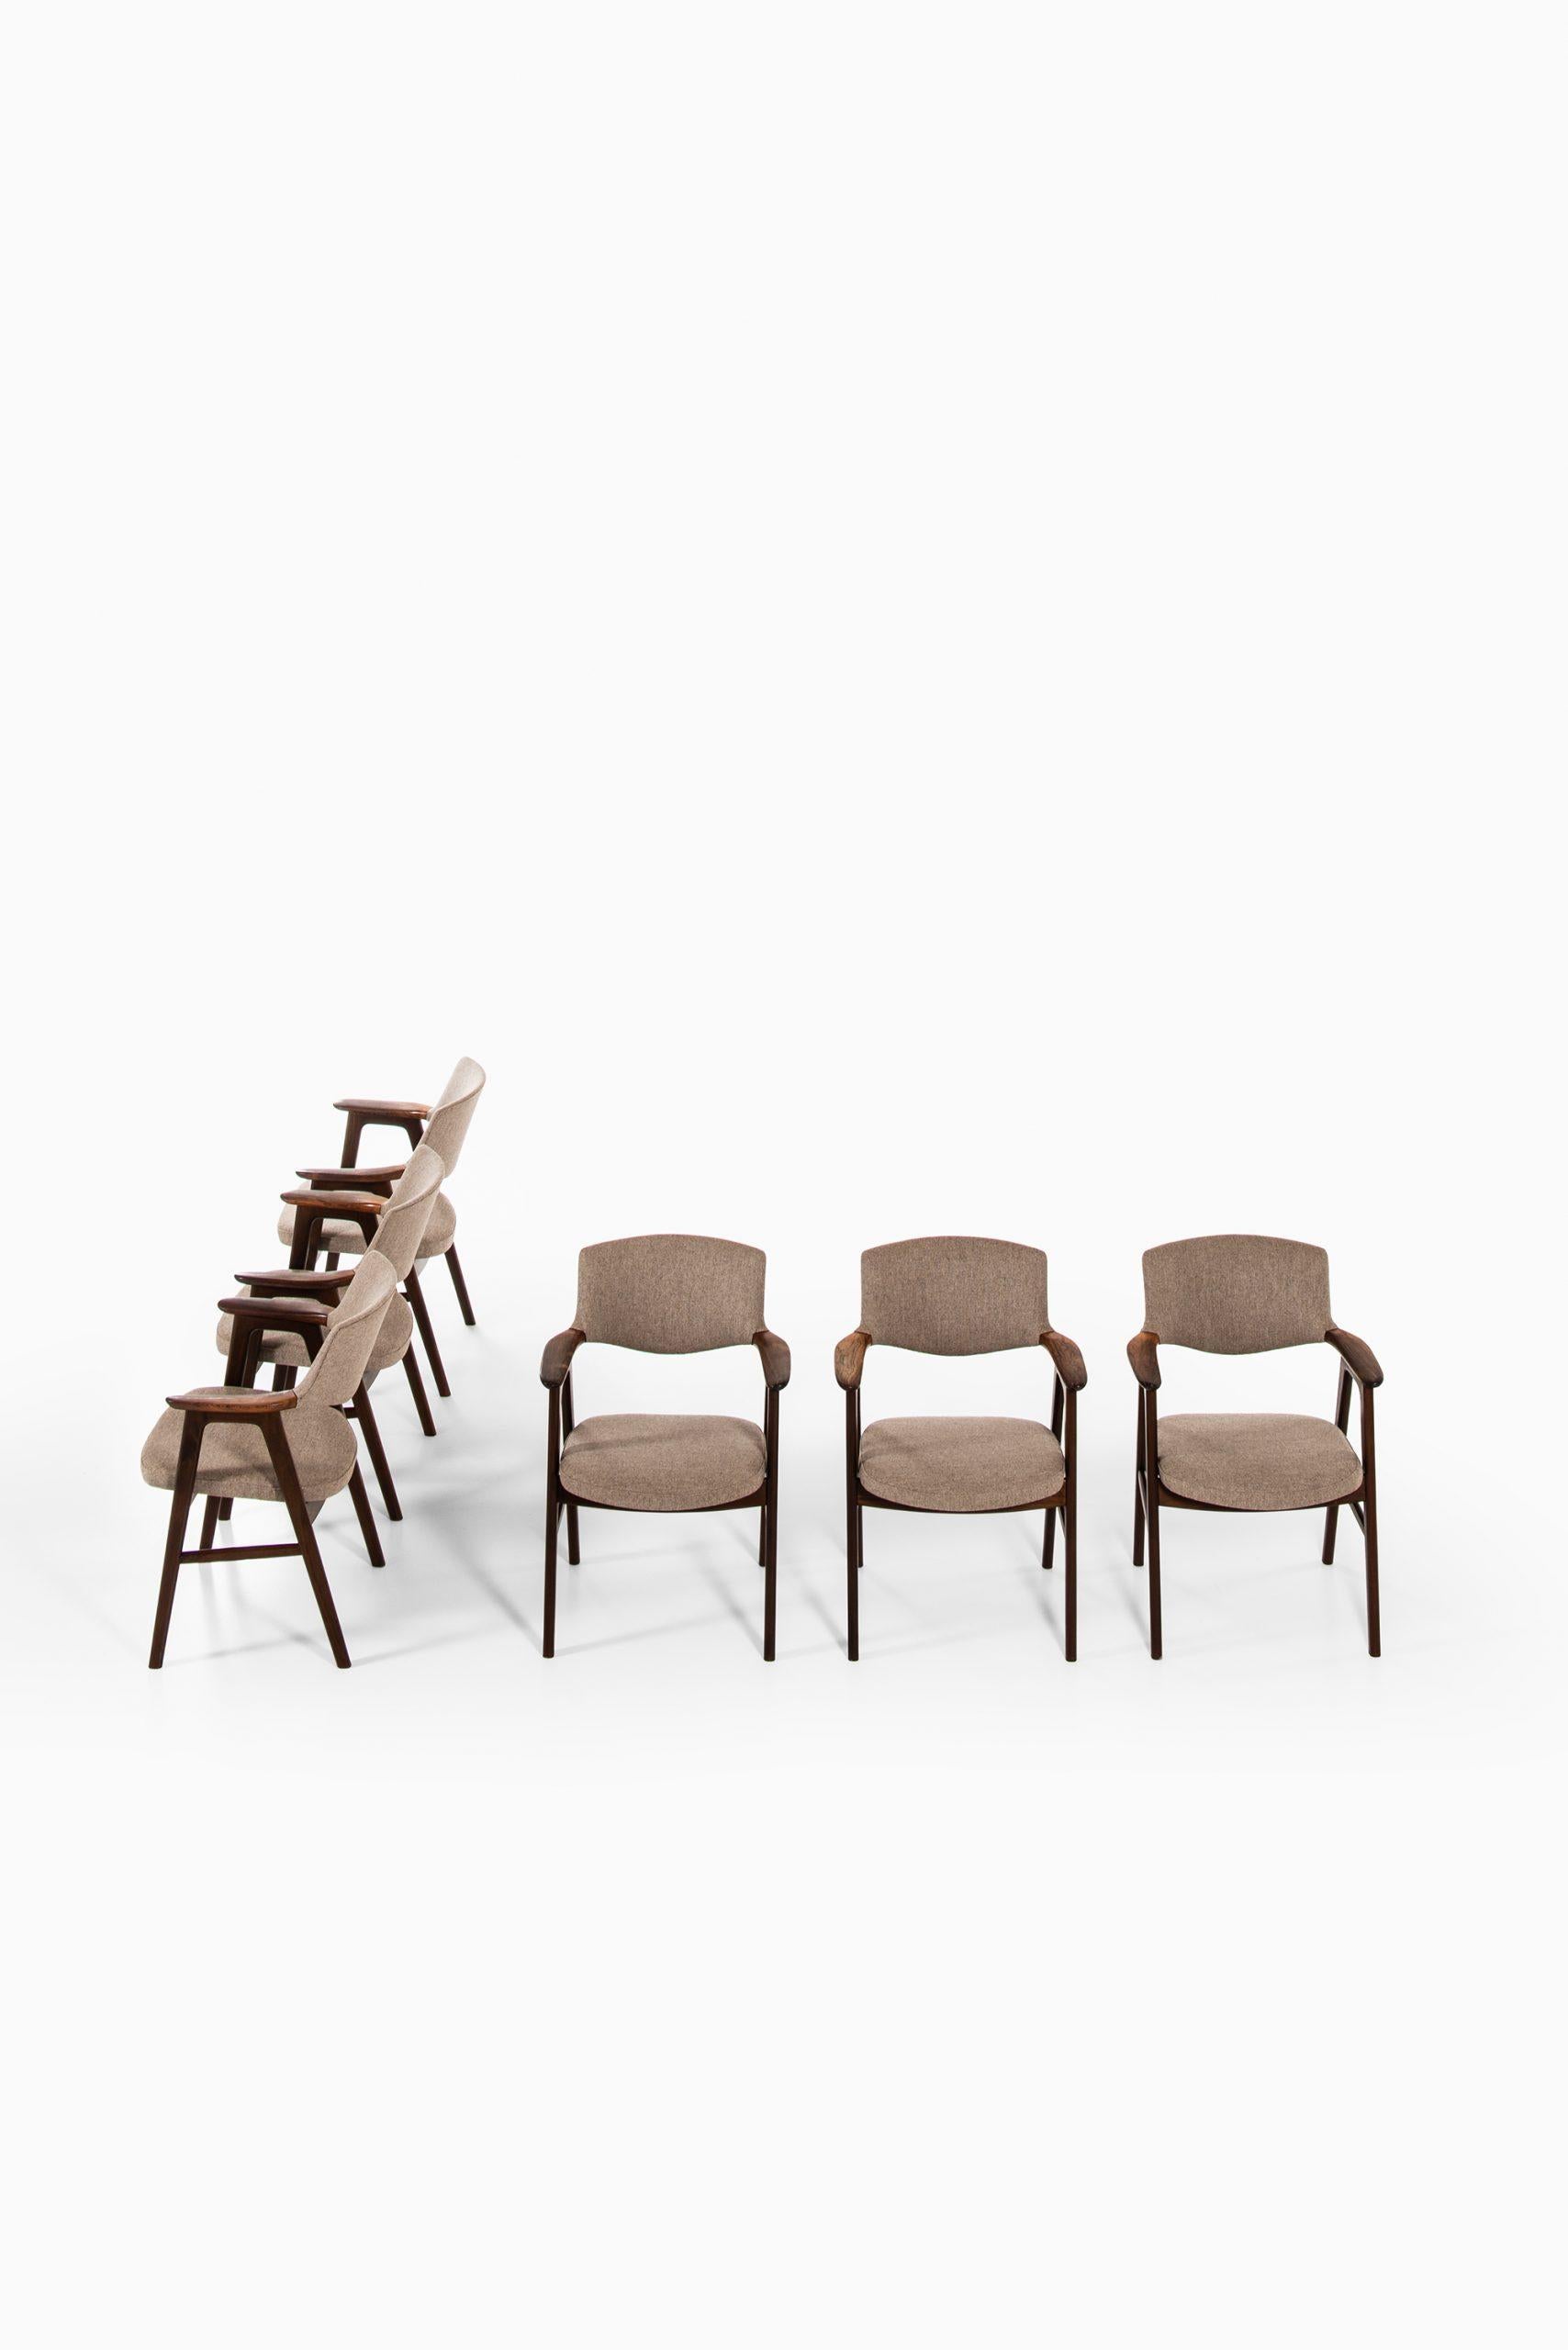 Rare set of 6 armchairs / dining chairs designed by Erik Kirkegaard. Produced by Høng Stolefabrik in Denmark.